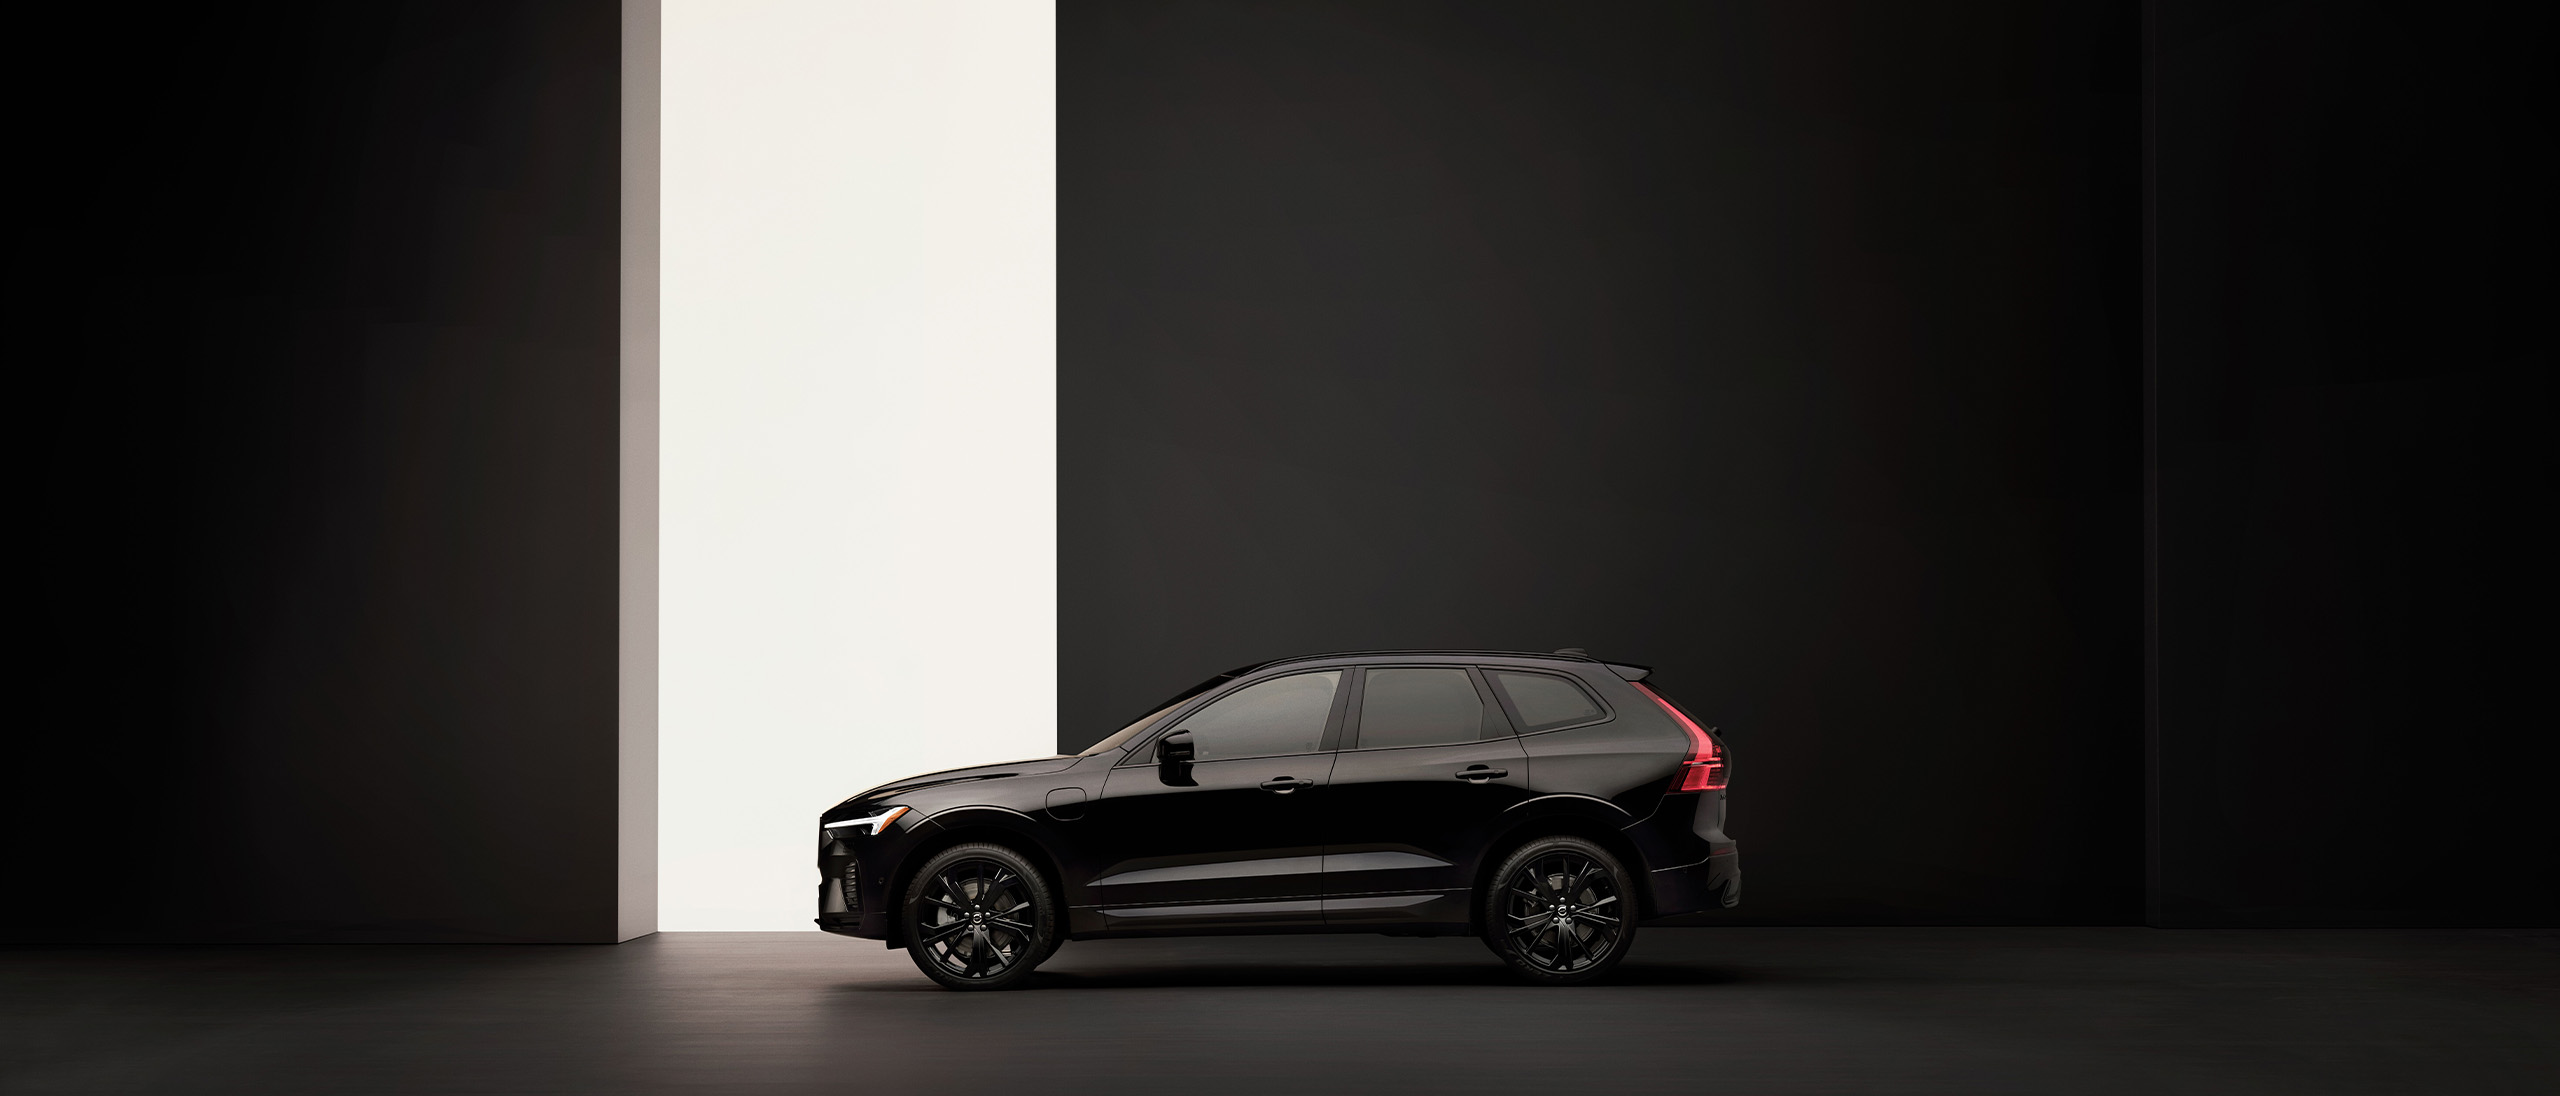   A video showing the exterior of  a Volvo XC60 Black edition